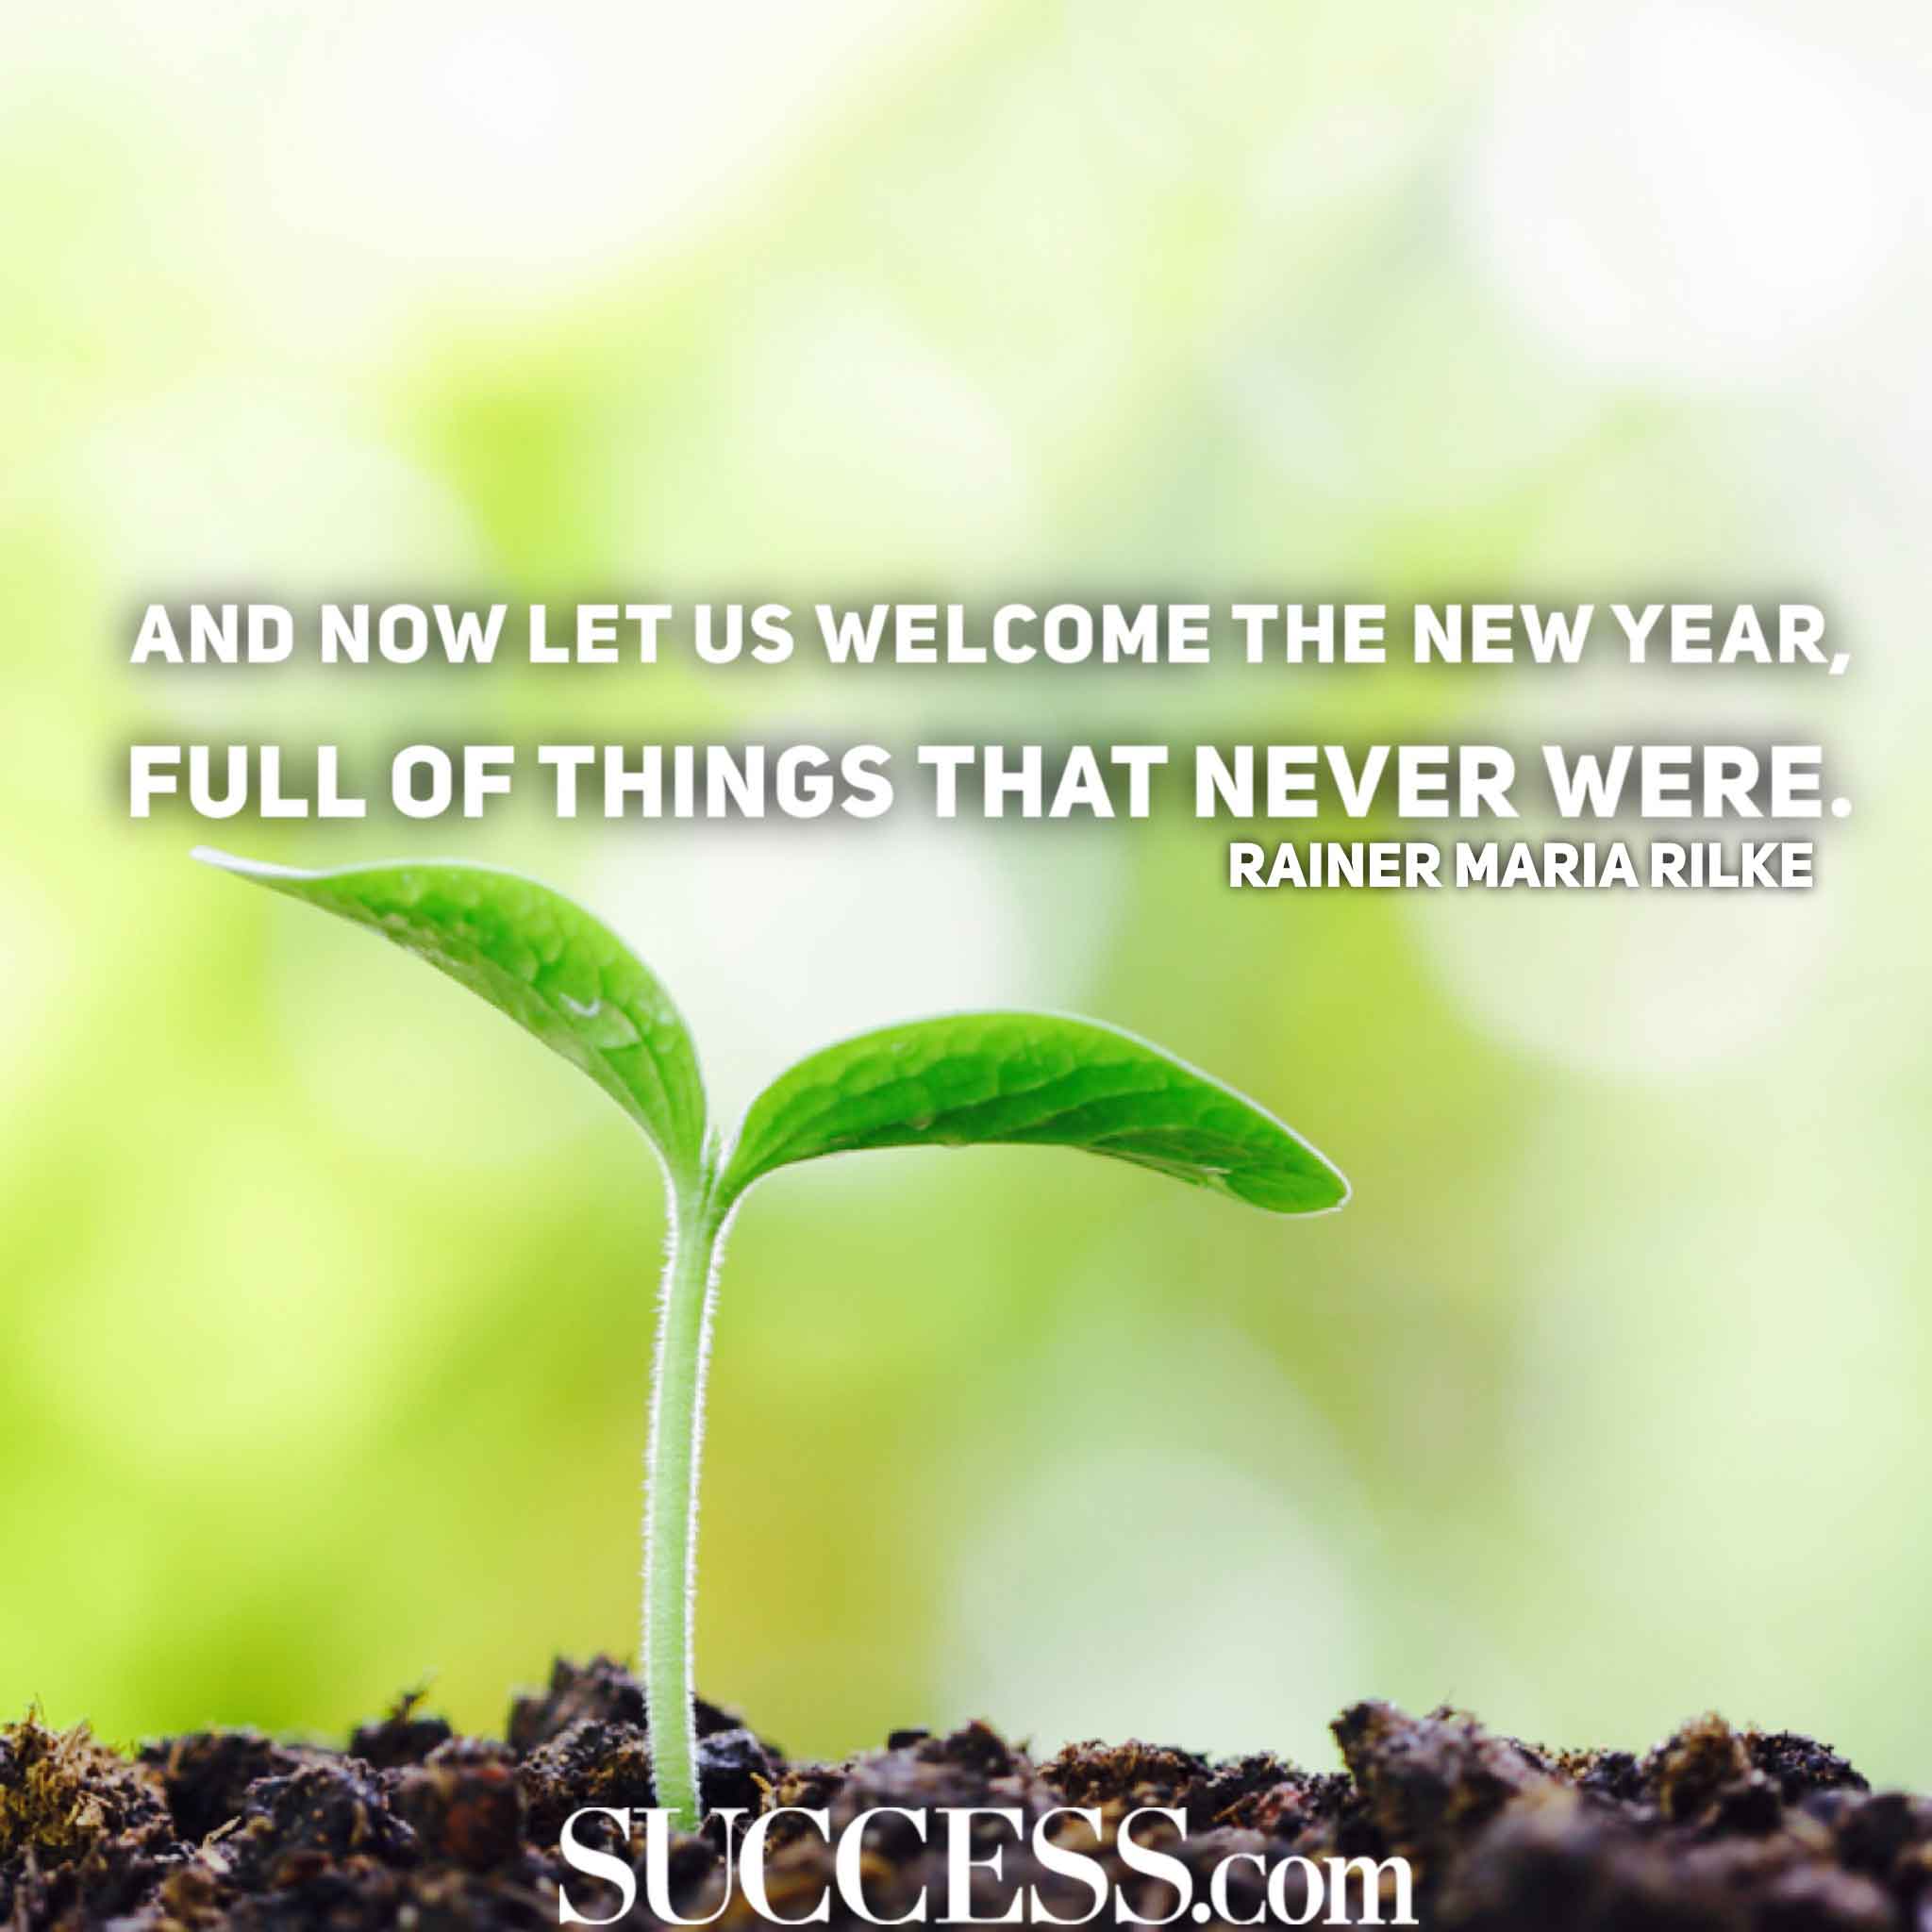 13 Uplifting Quotes About New Beginnings